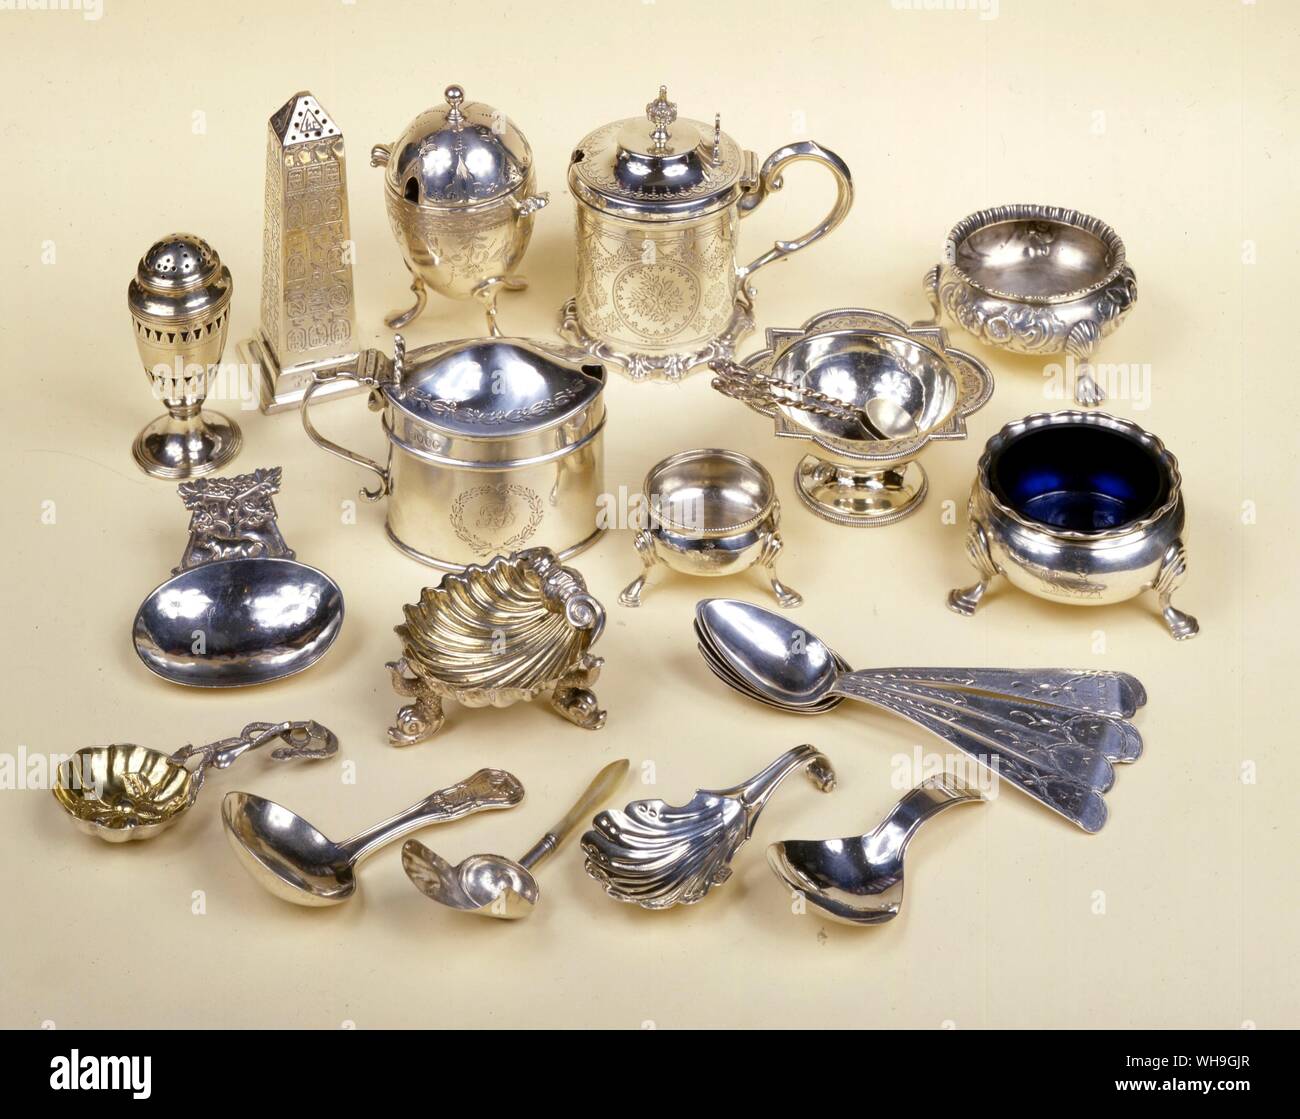 Antiques Display of Various Objects Stock Photo